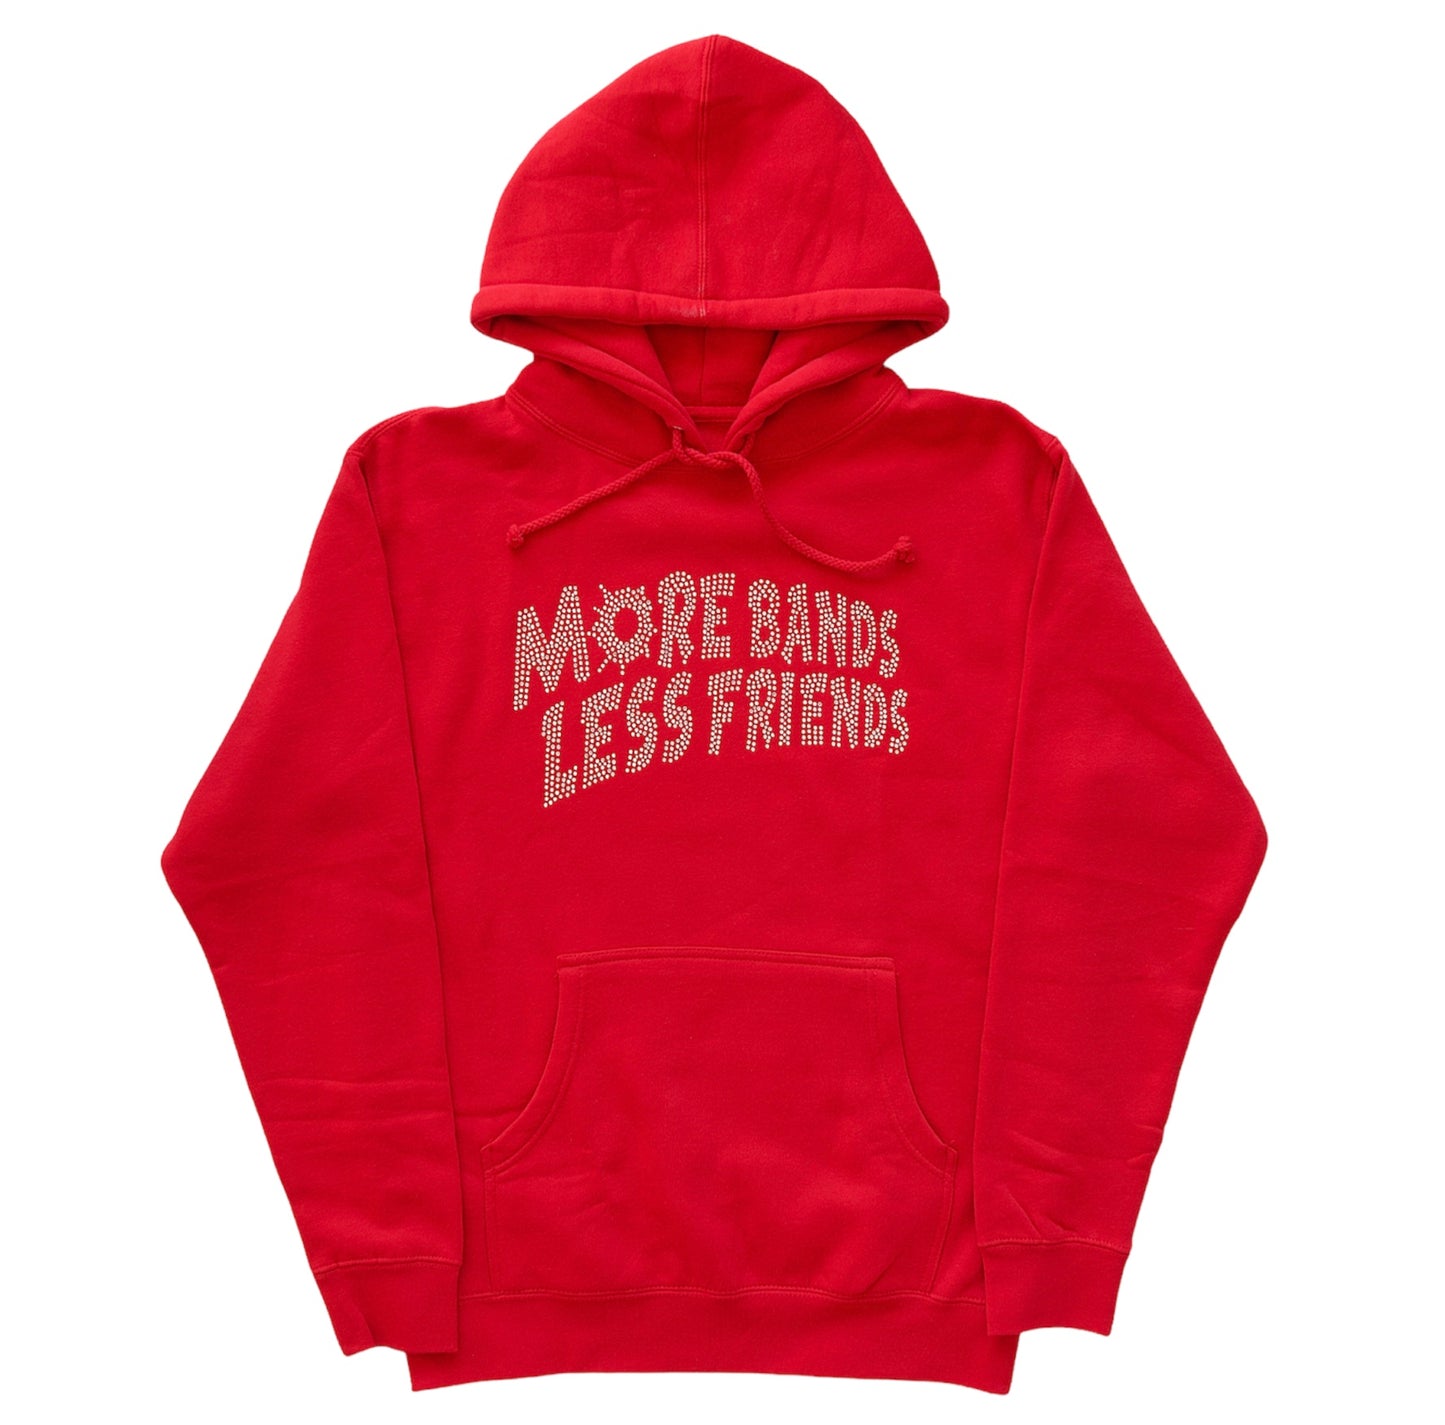 Red Rhinestone “More Bands Less Friends” Hoodie